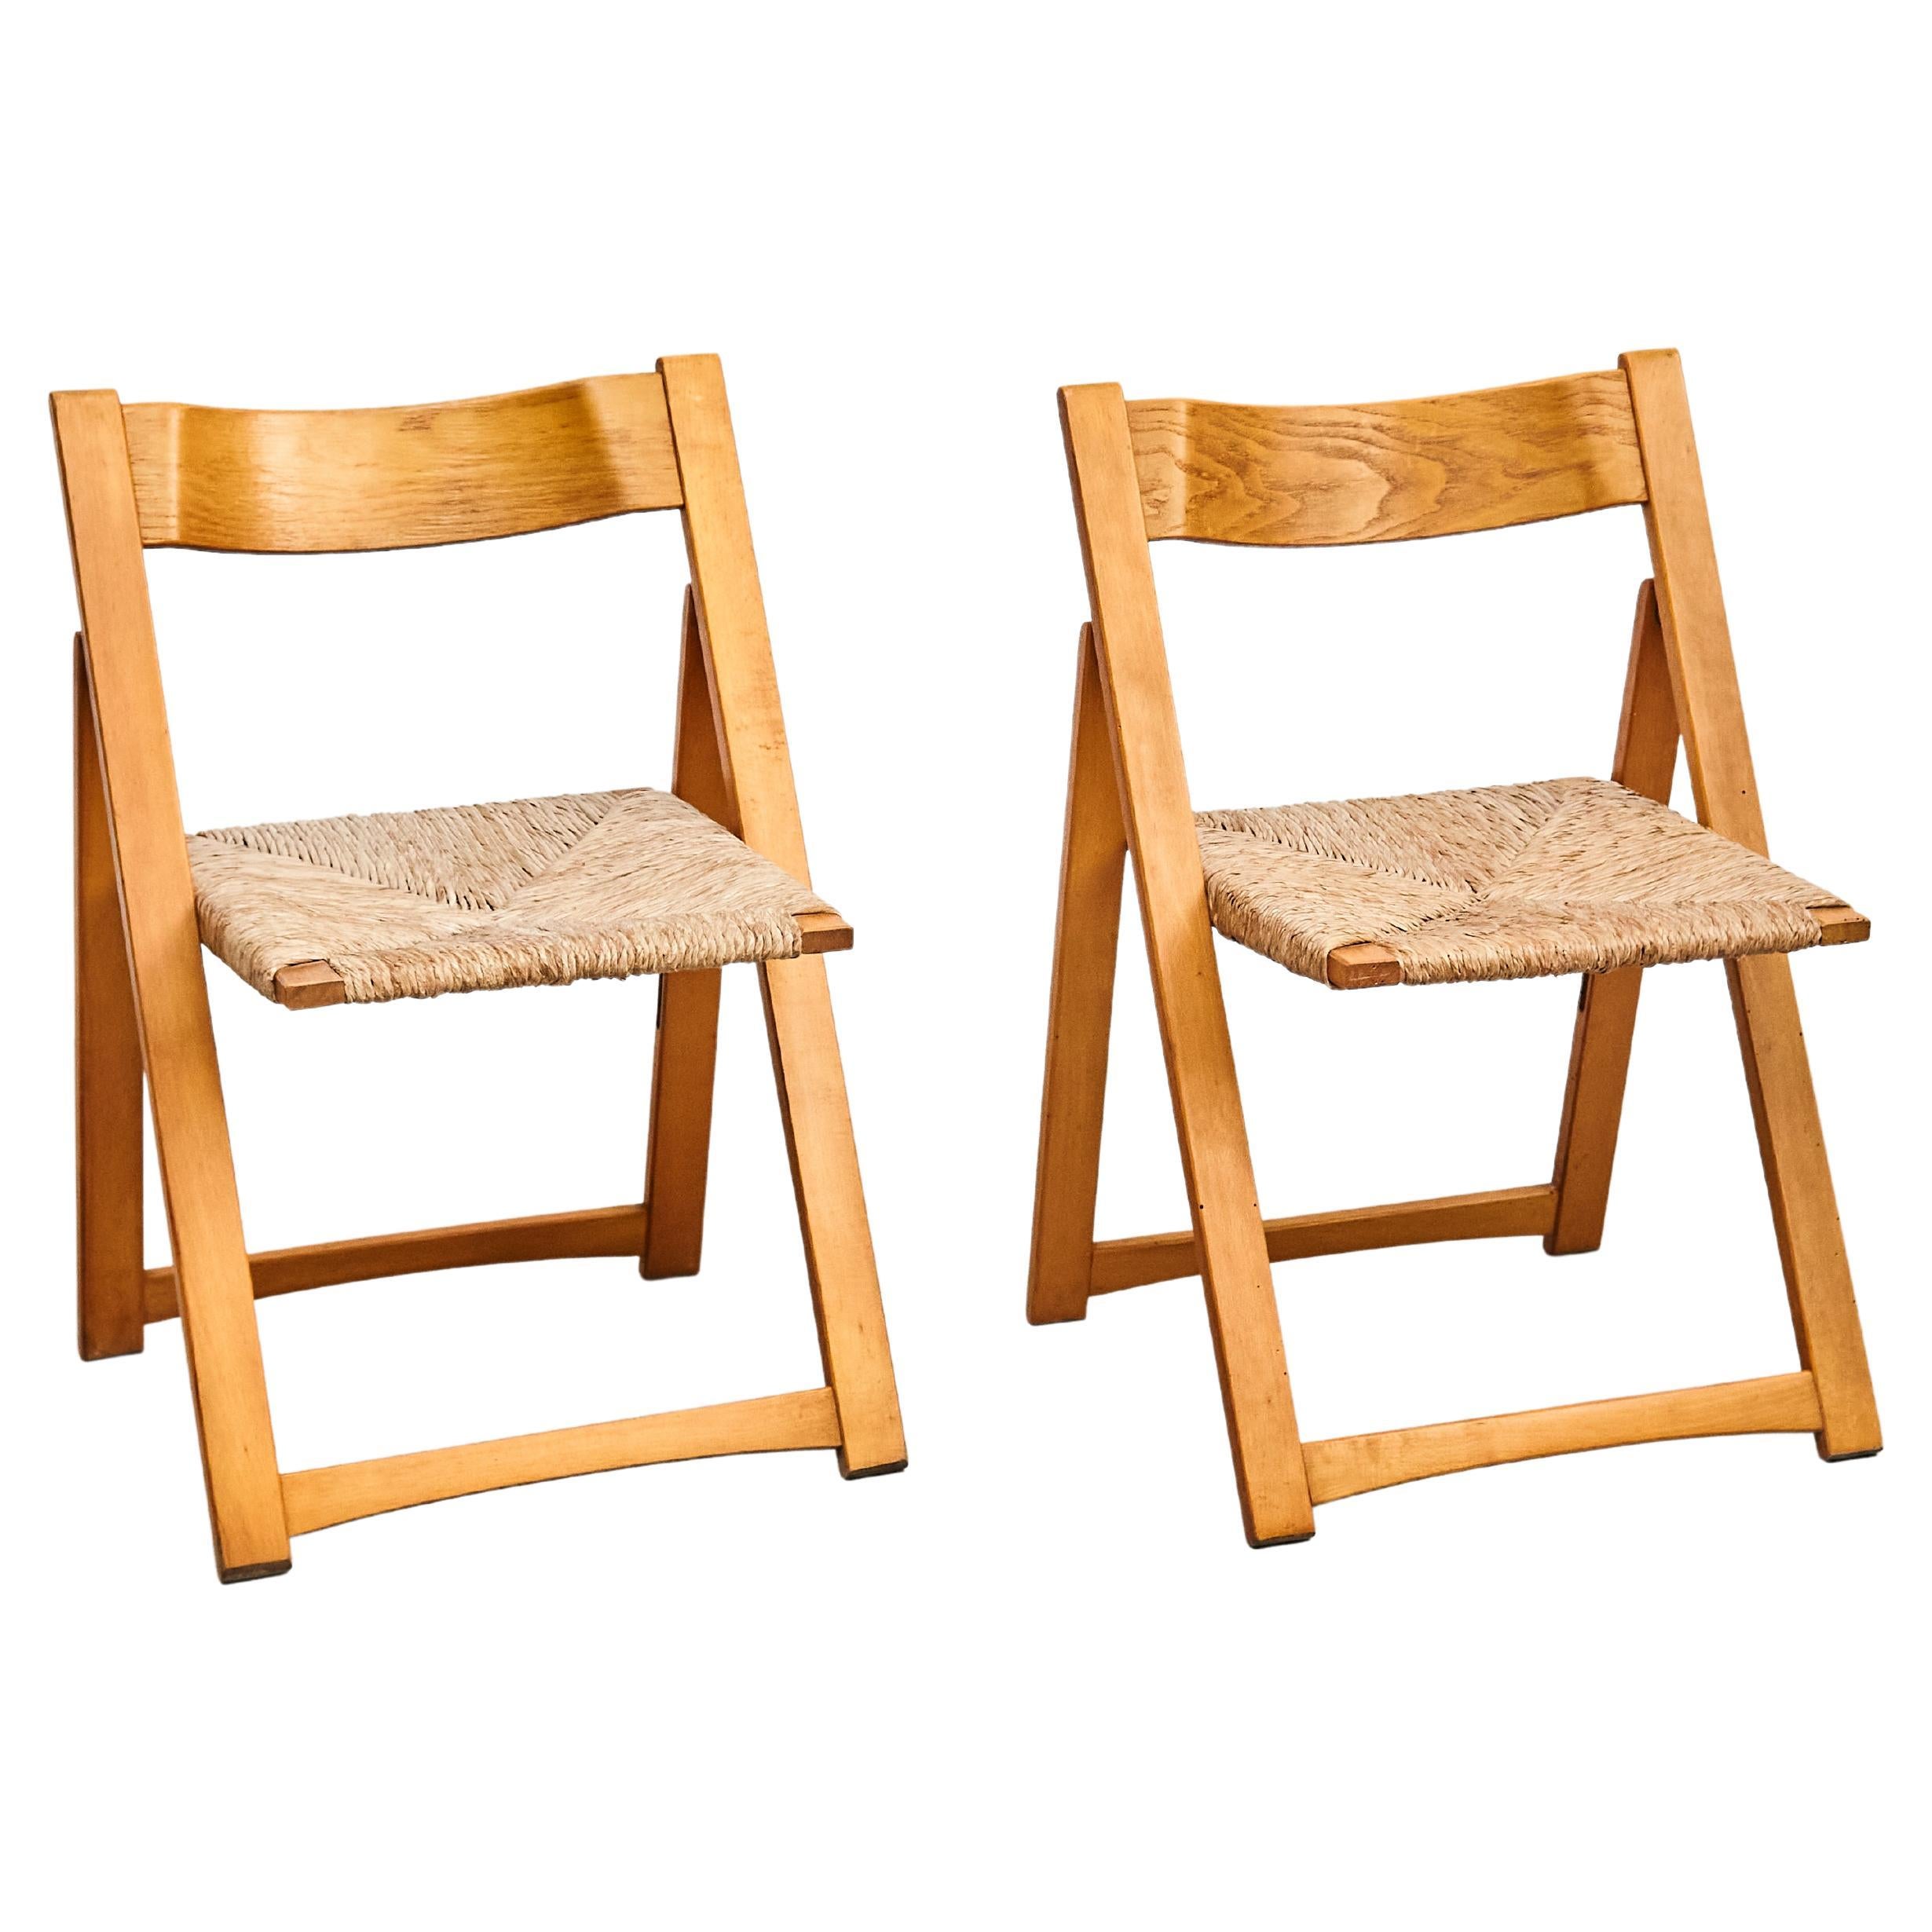 Pair of Rationalist Rattan and Wood Folding Chairs, circa 1960